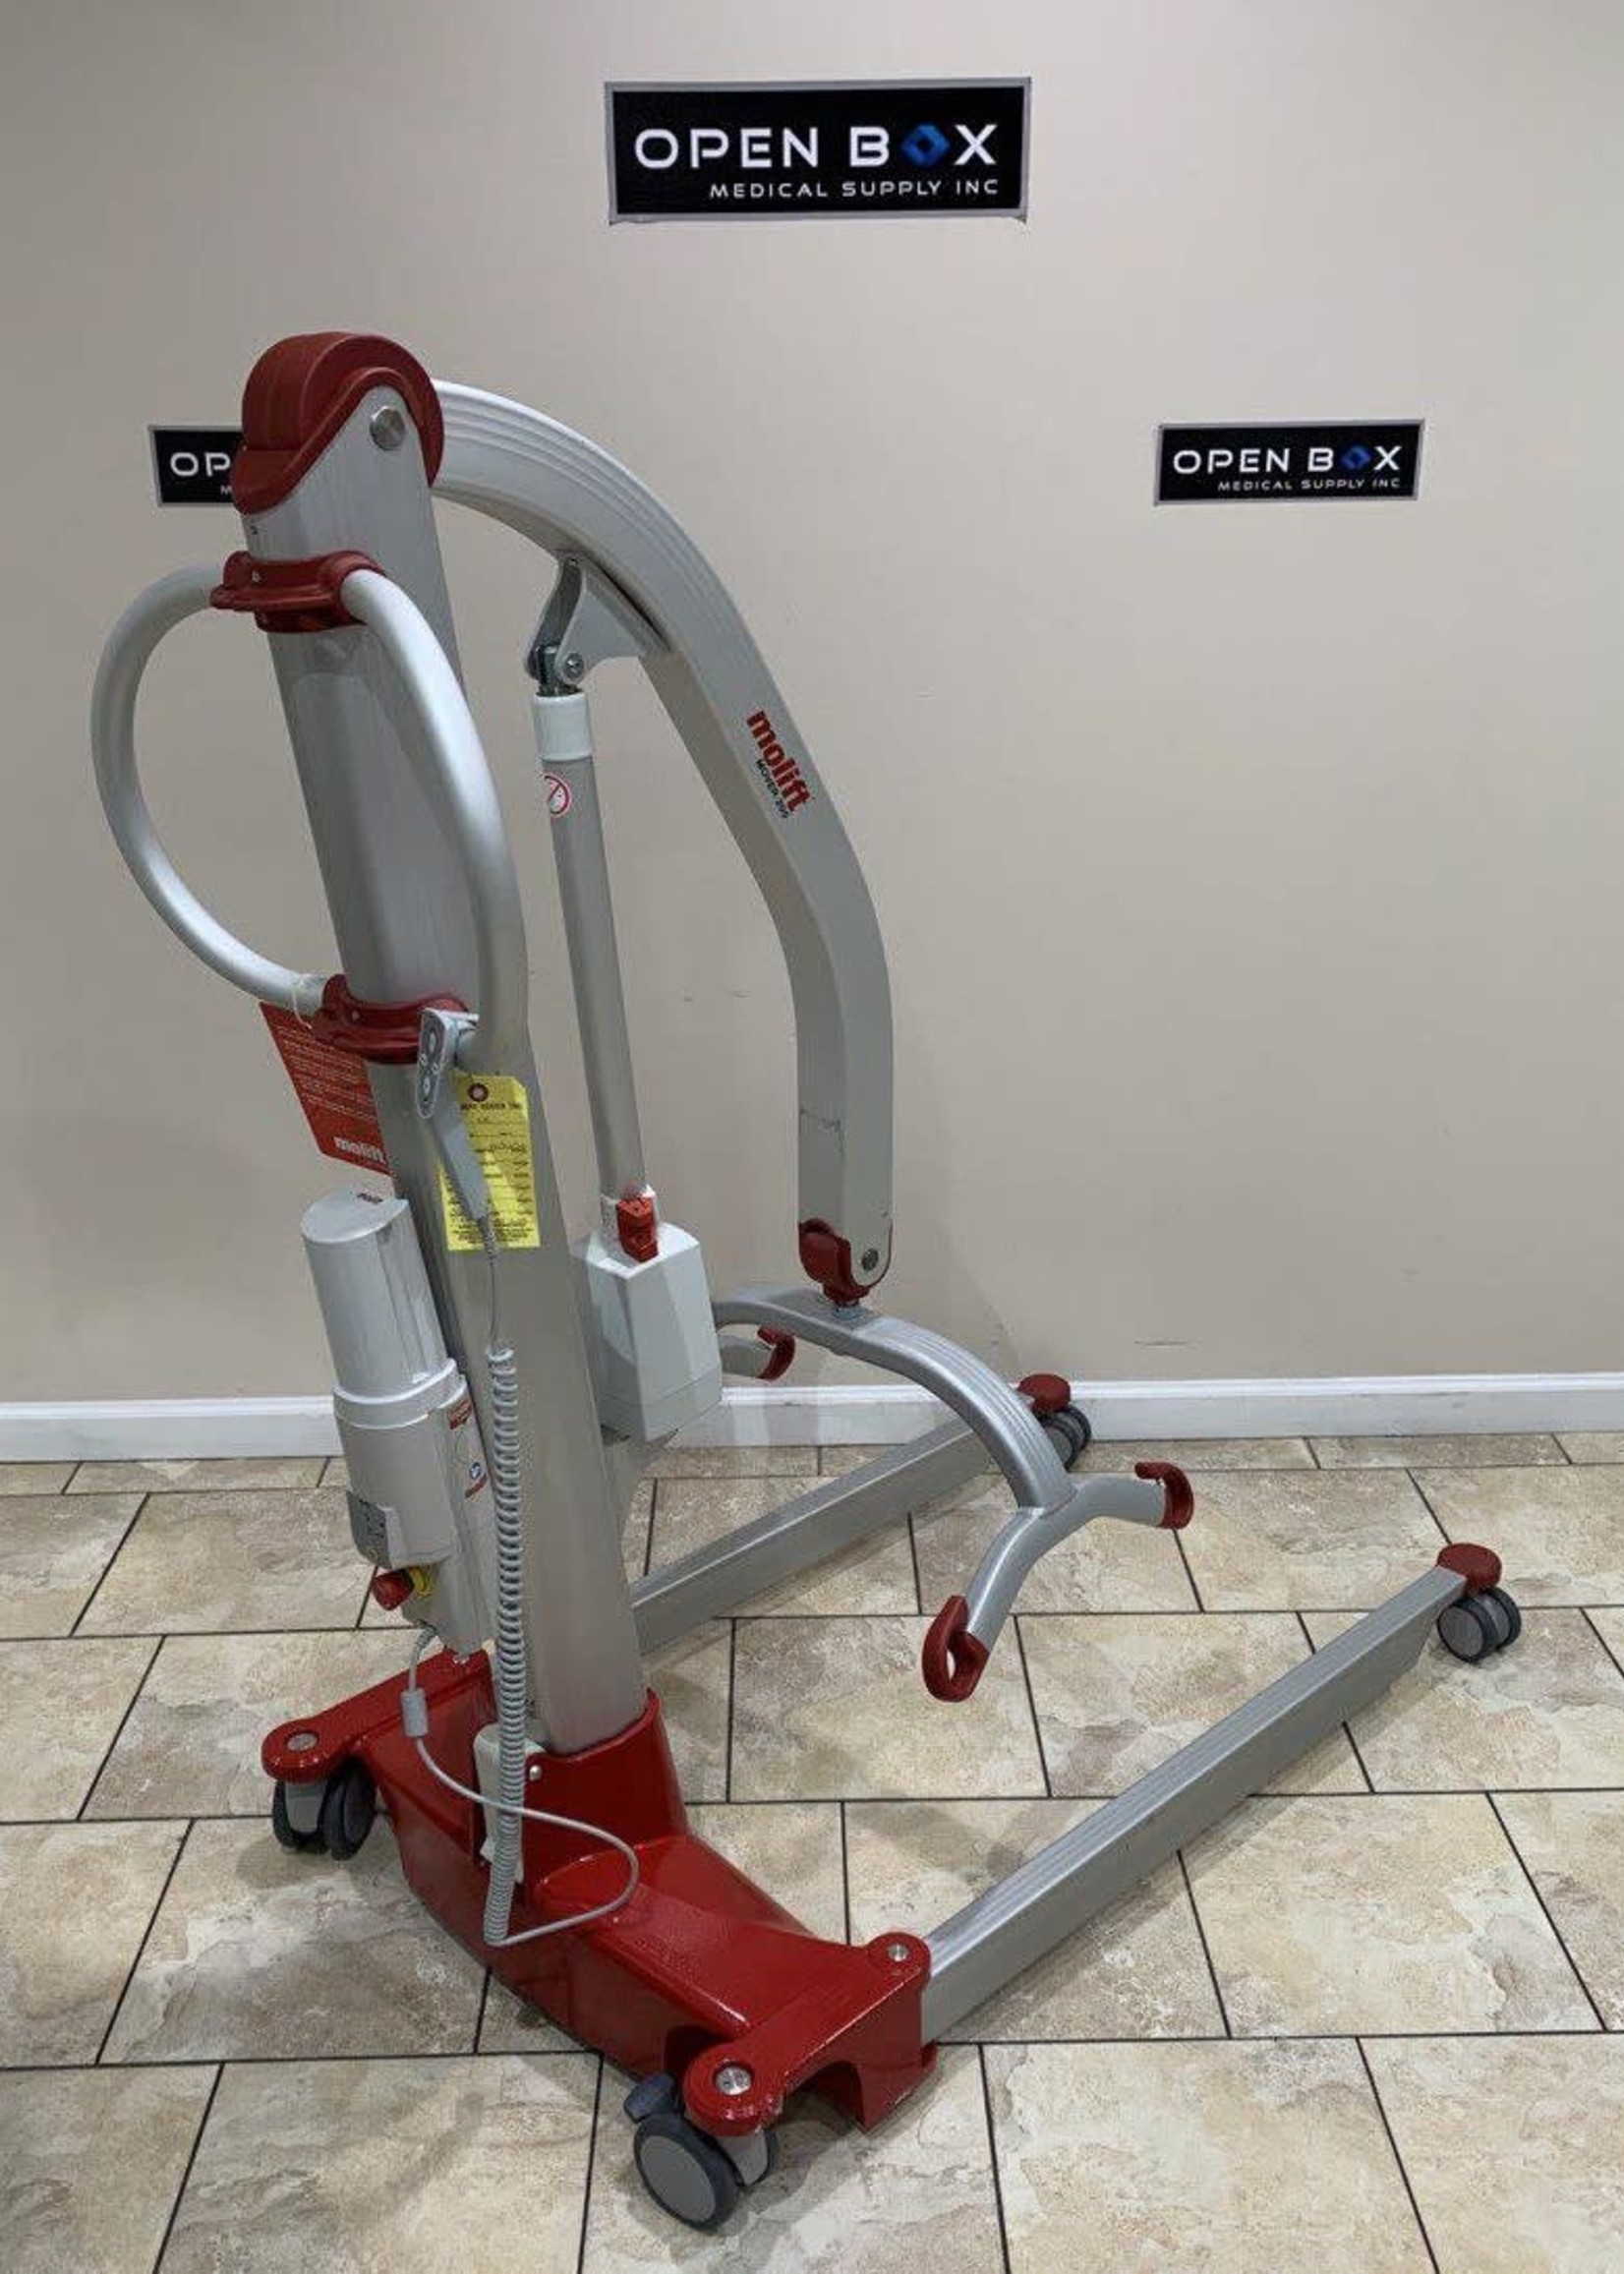 Molift Mover 205 Electric Patient Lift With Power Base (Used)